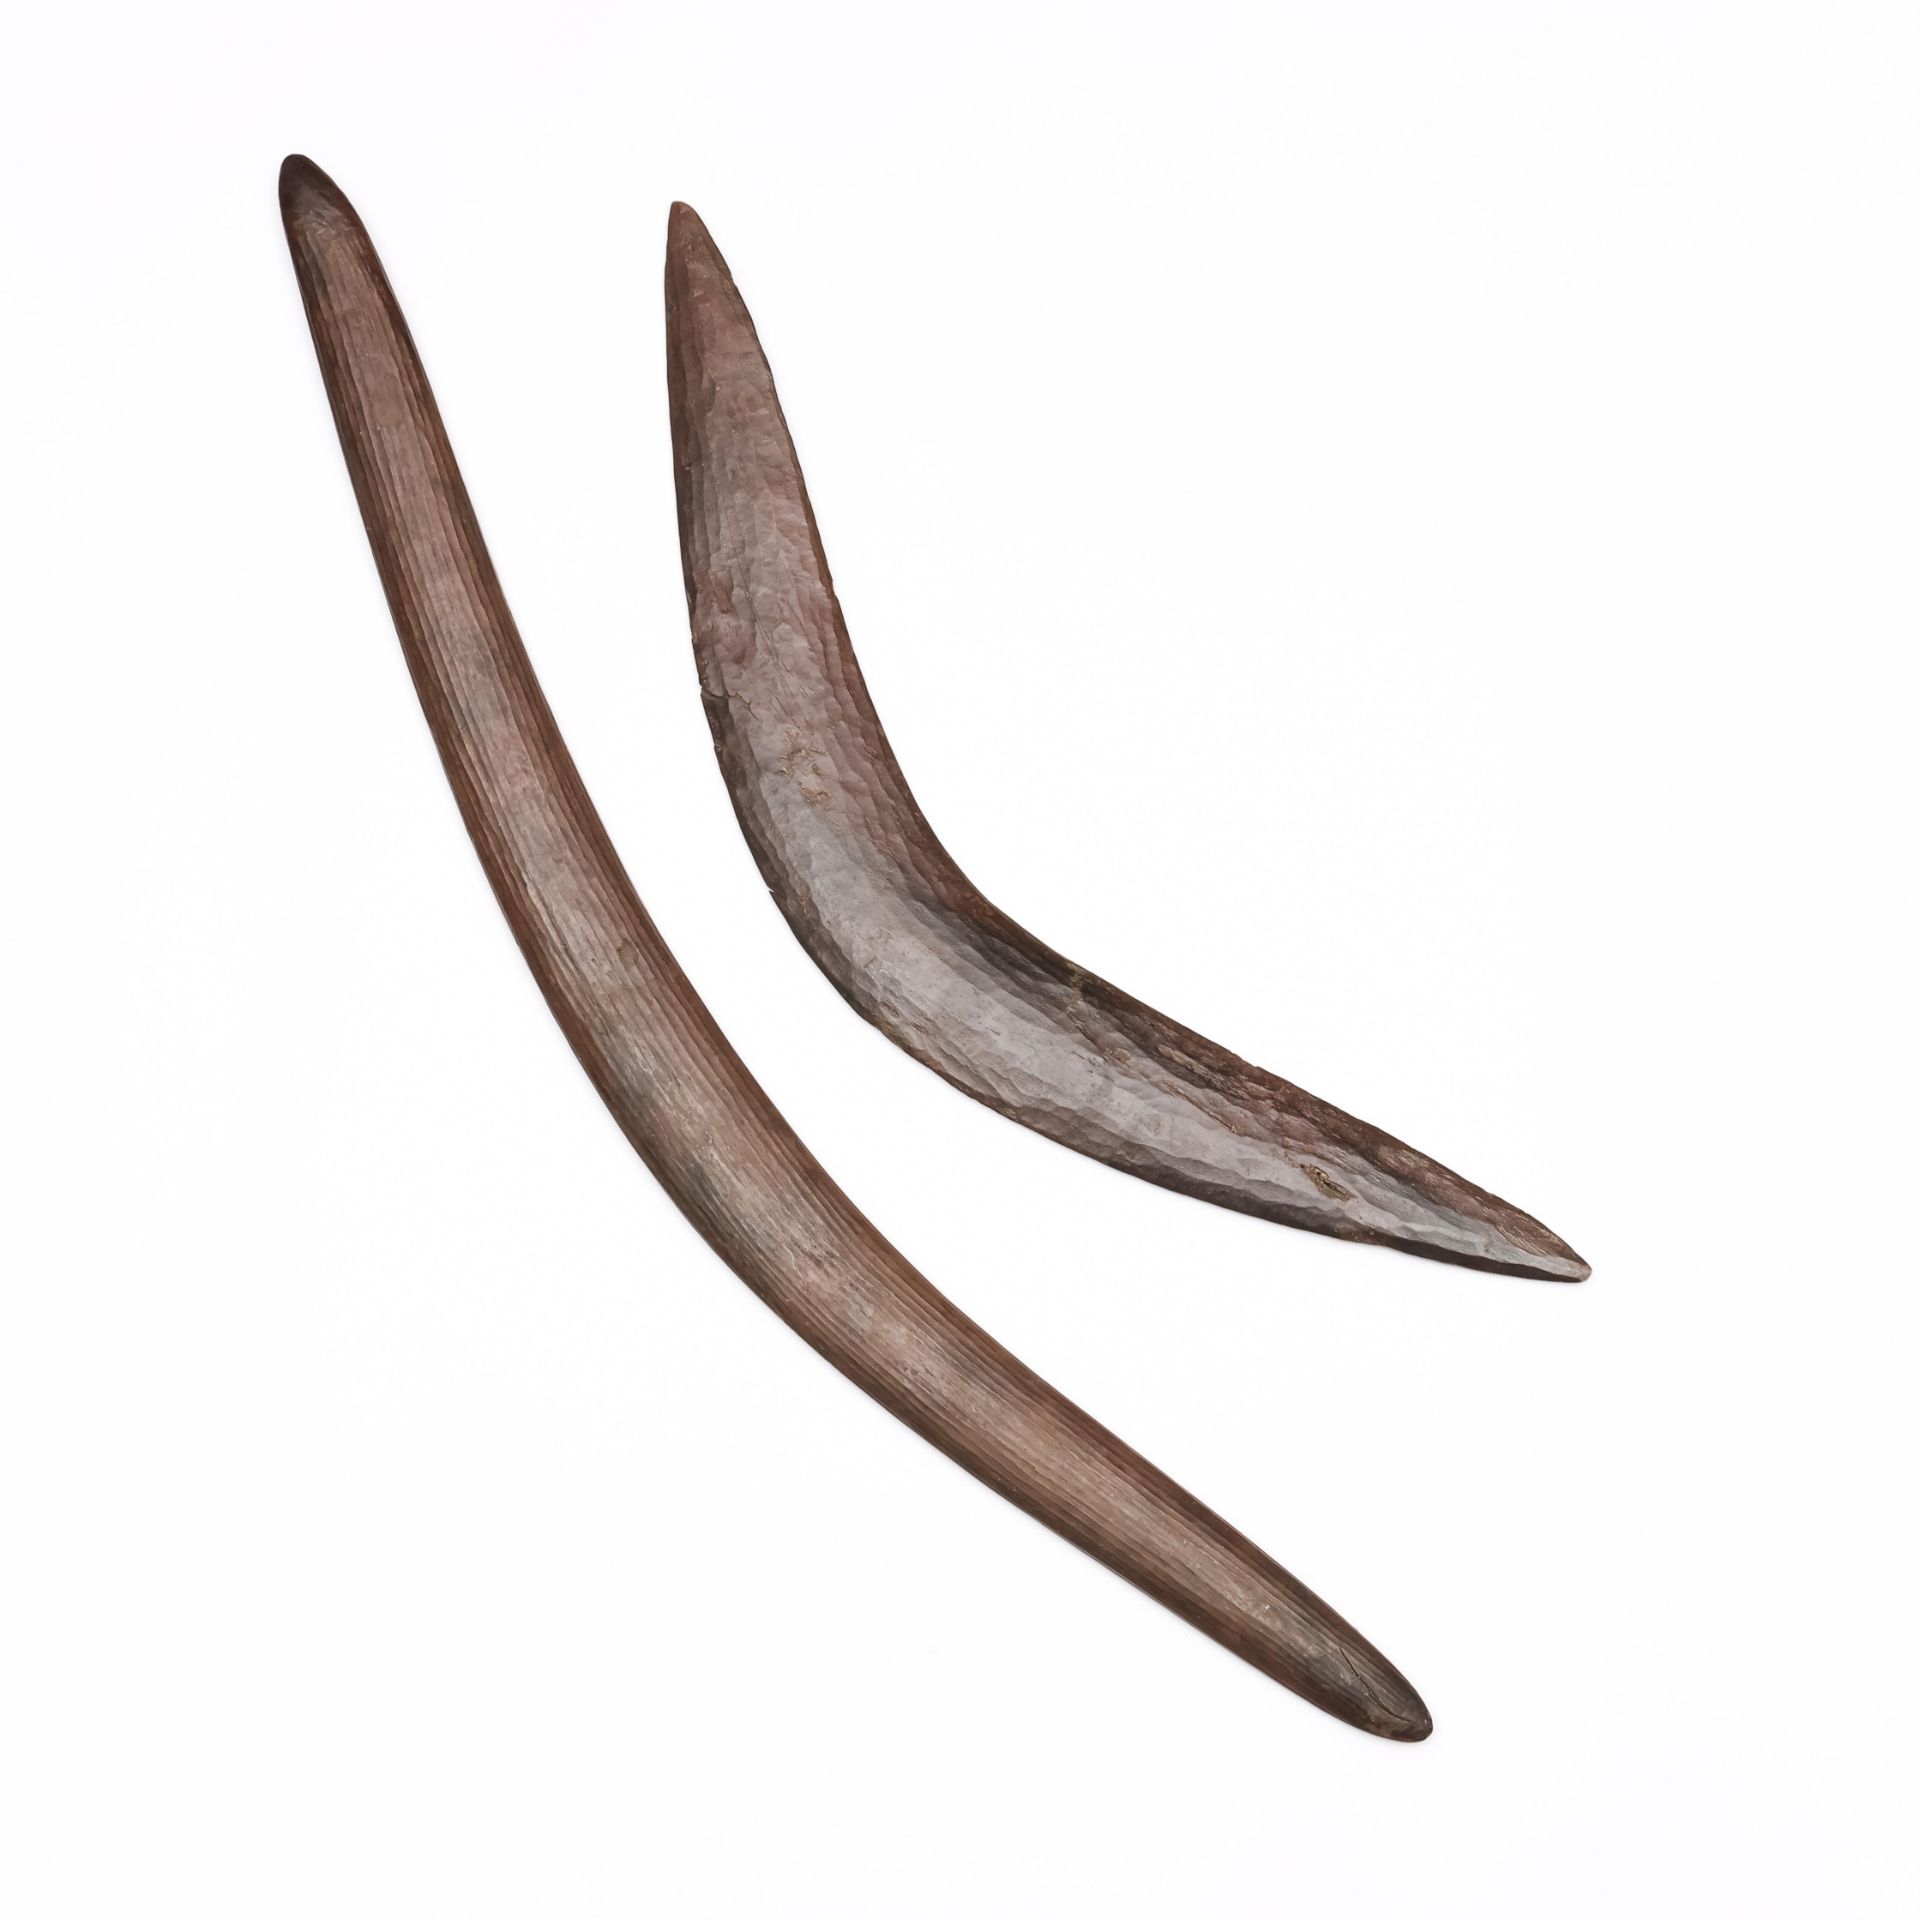 Australia, two Aboriginal boomerangs, both with a notched pattern.